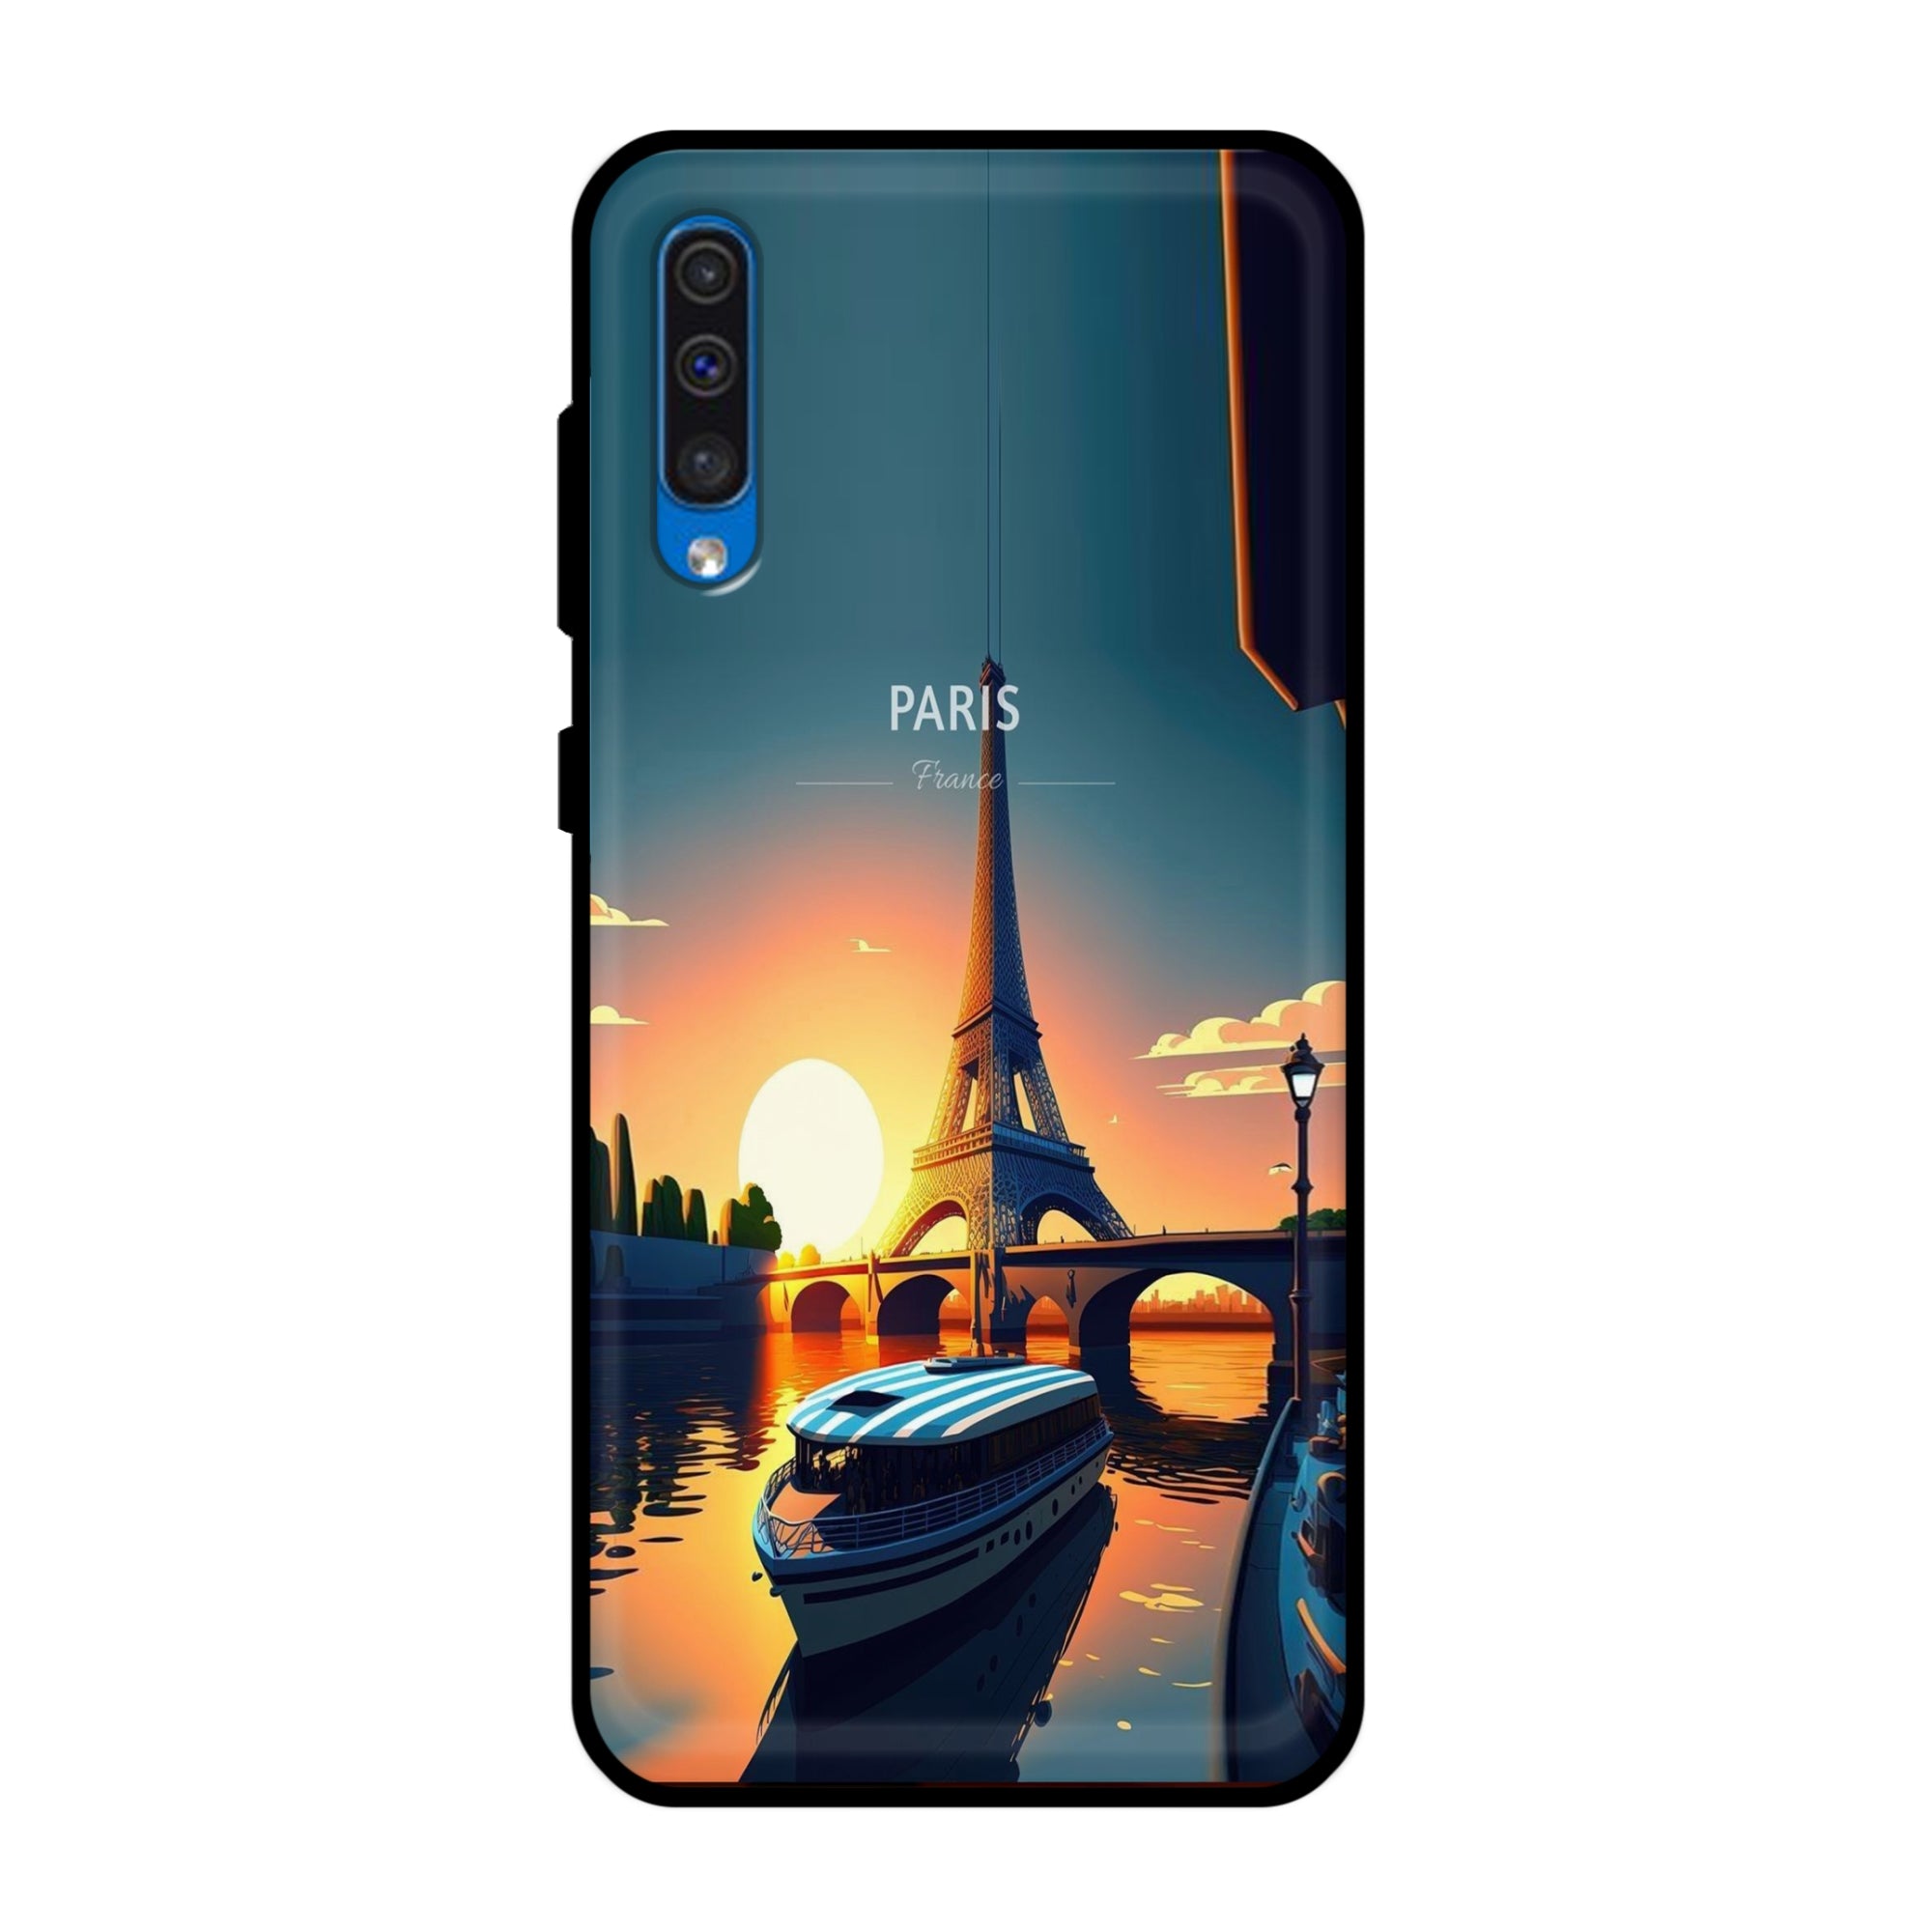 Buy France Metal-Silicon Back Mobile Phone Case/Cover For Samsung Galaxy A50 / A50s / A30s Online